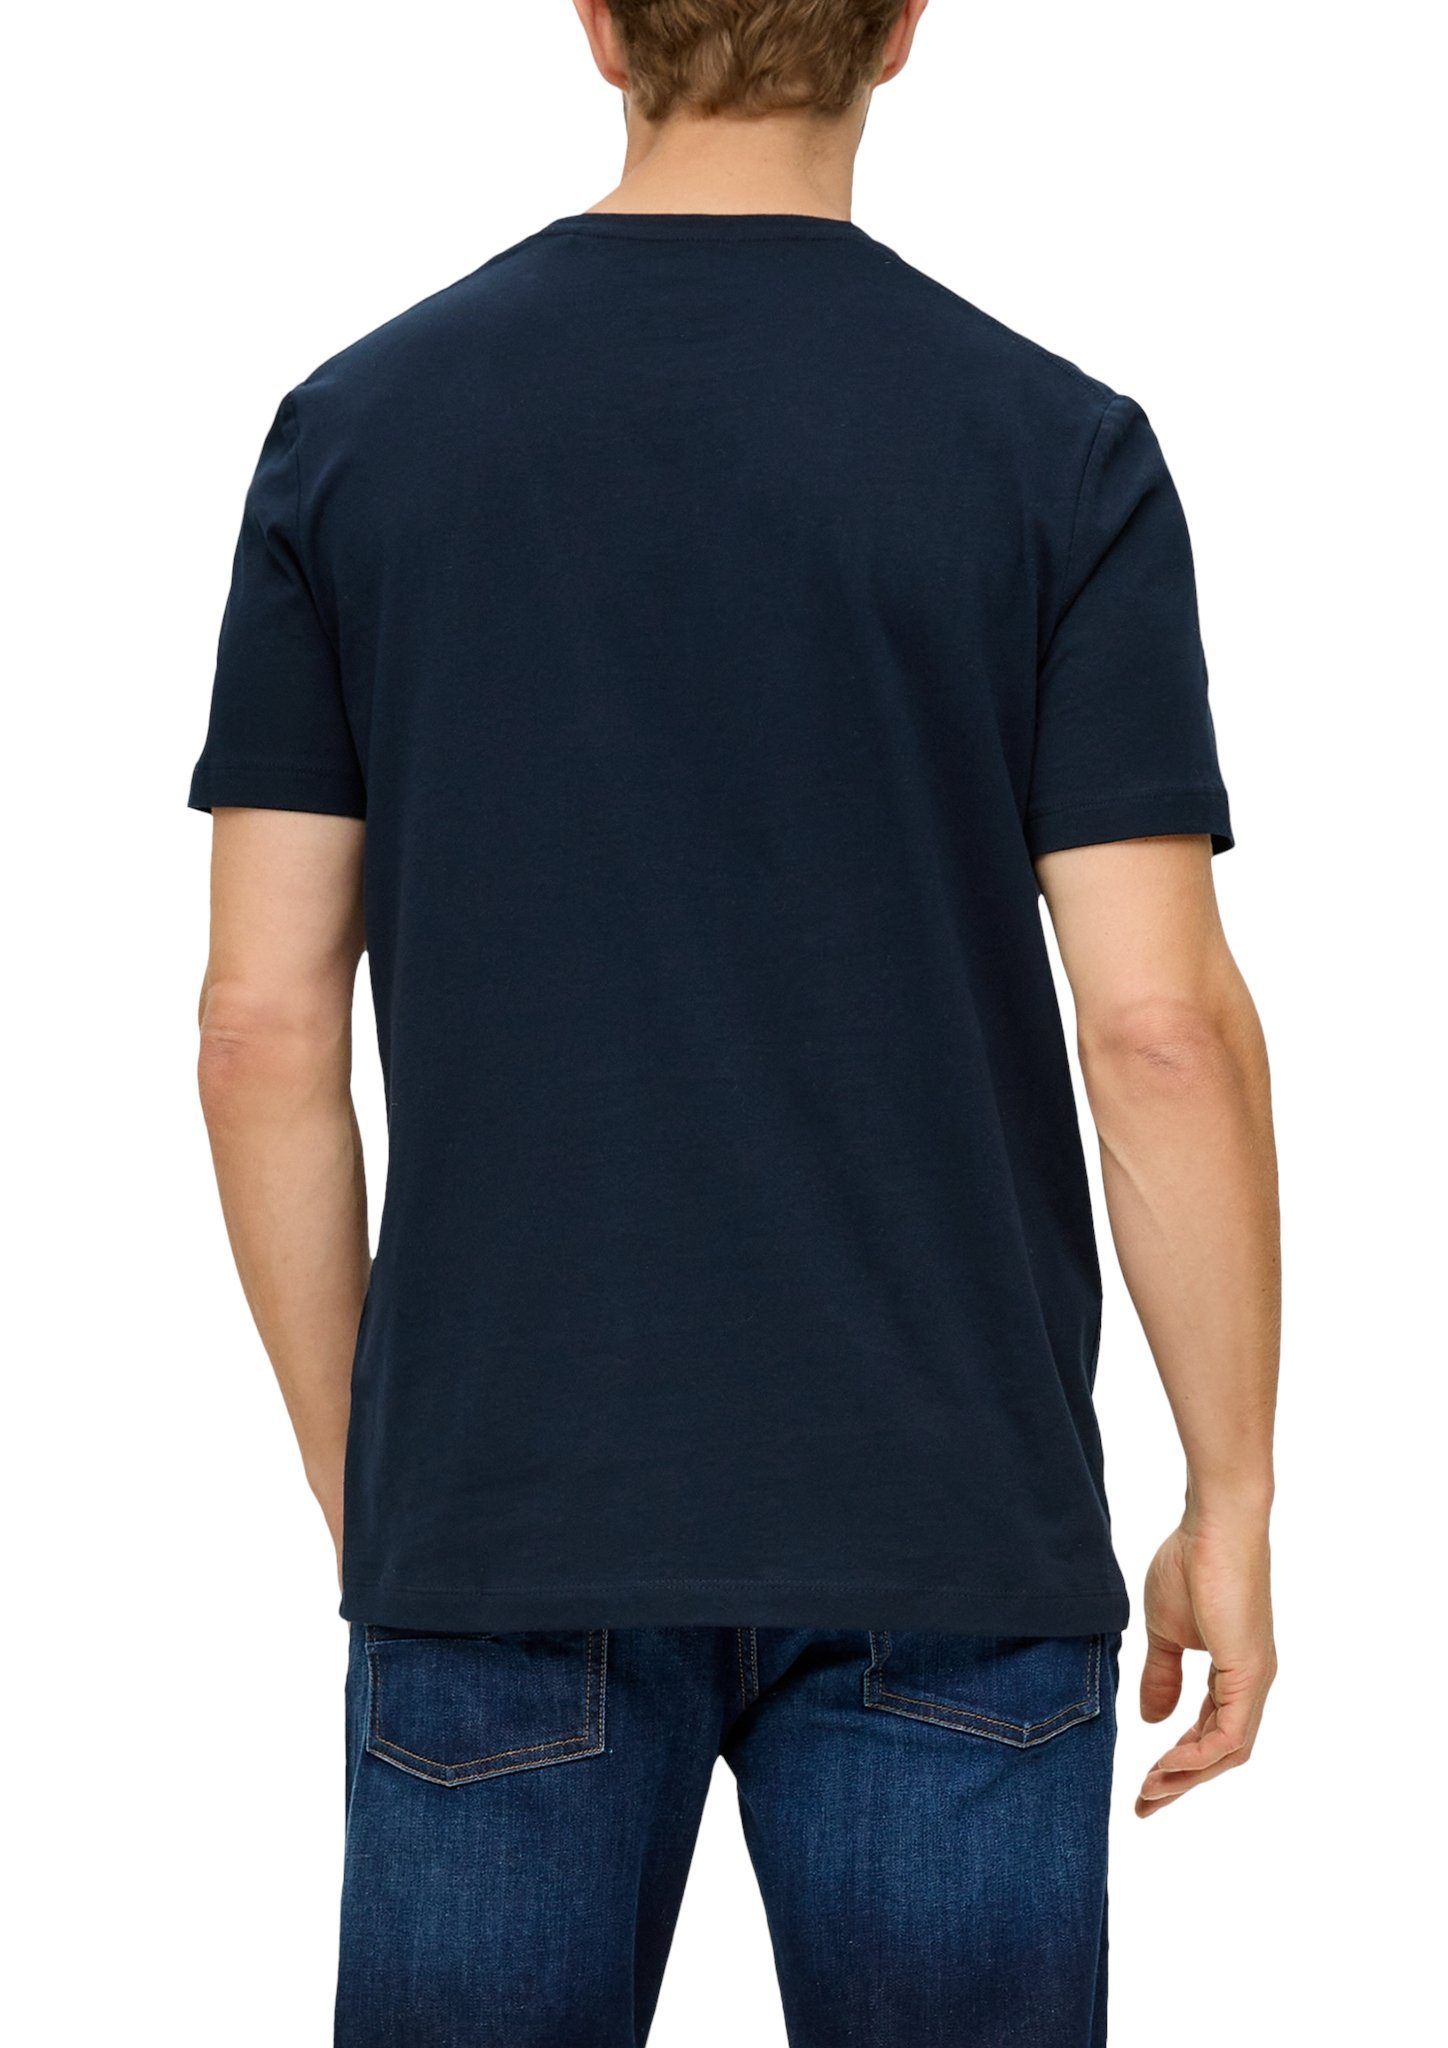 s.Oliver T-Shirt im sportiven blue Look